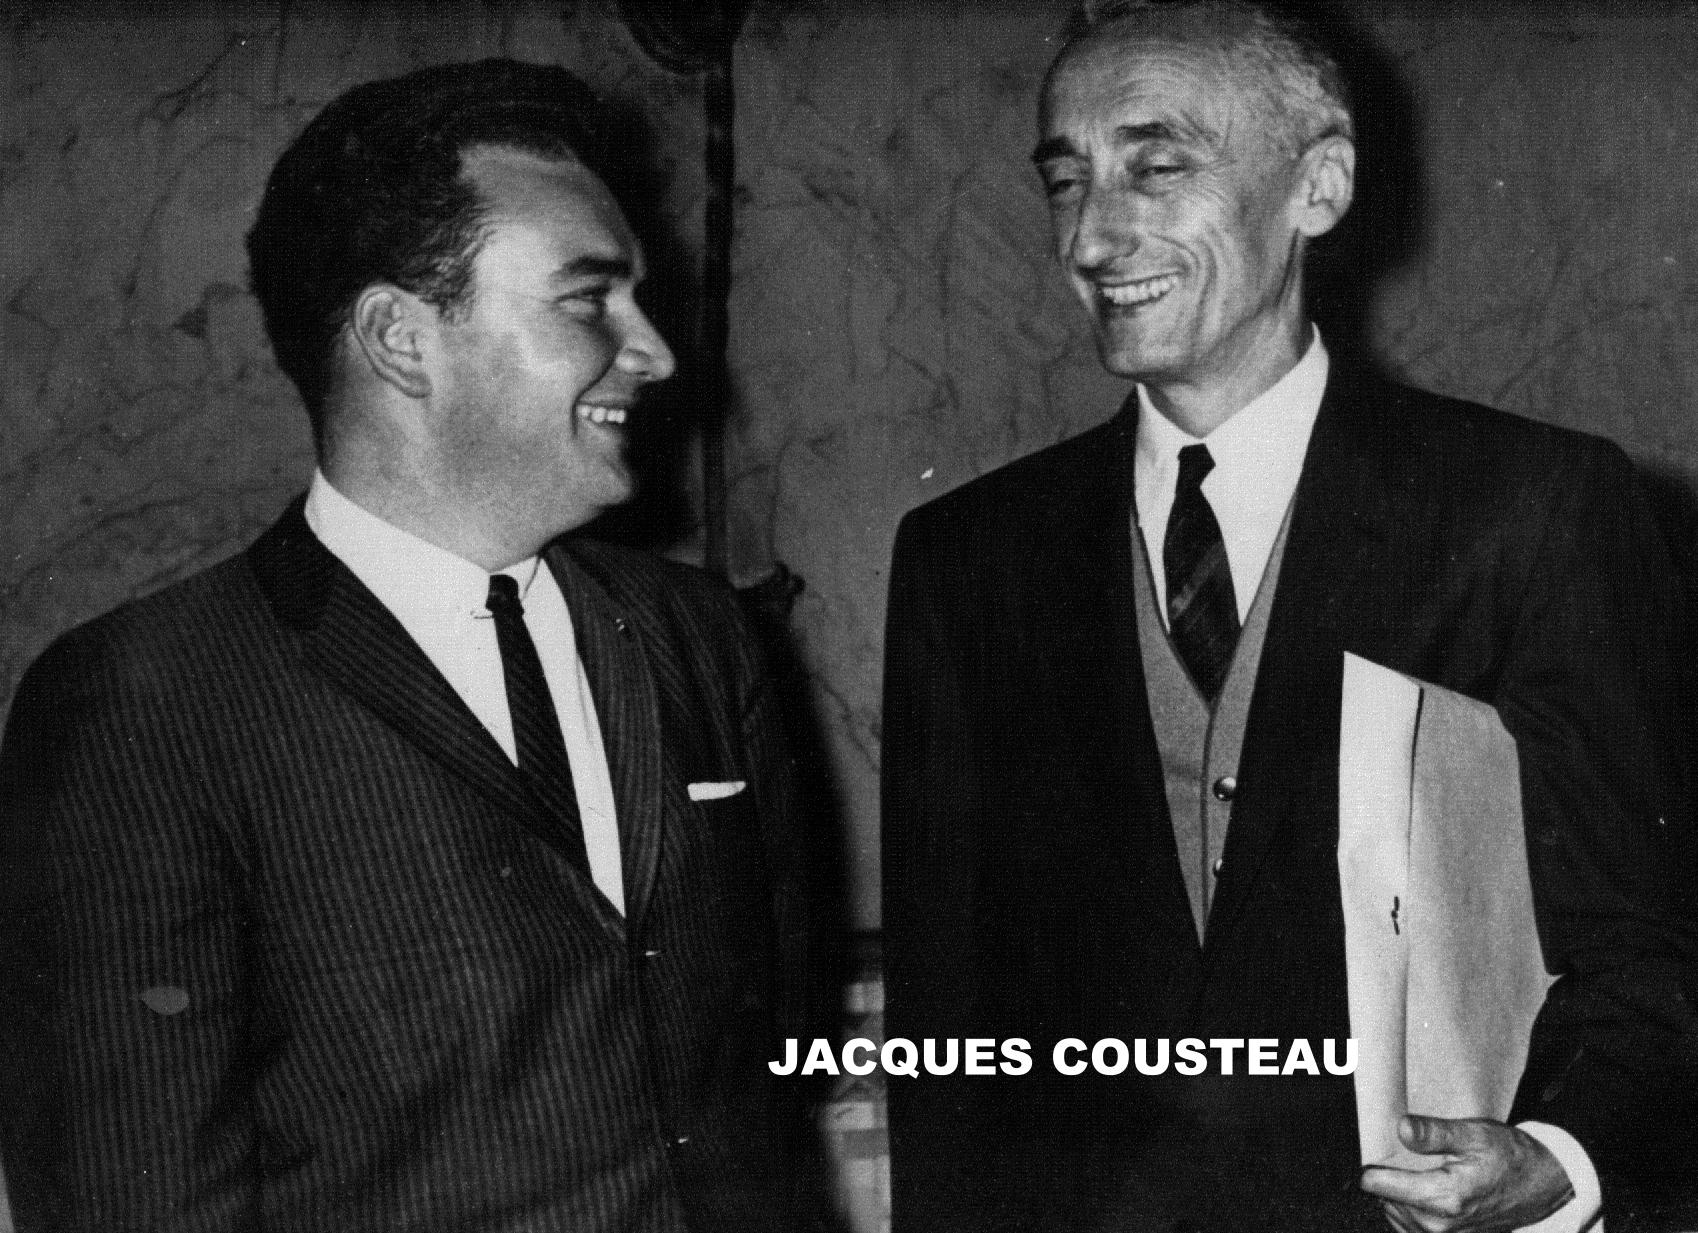 Me and Jacques Cousteau